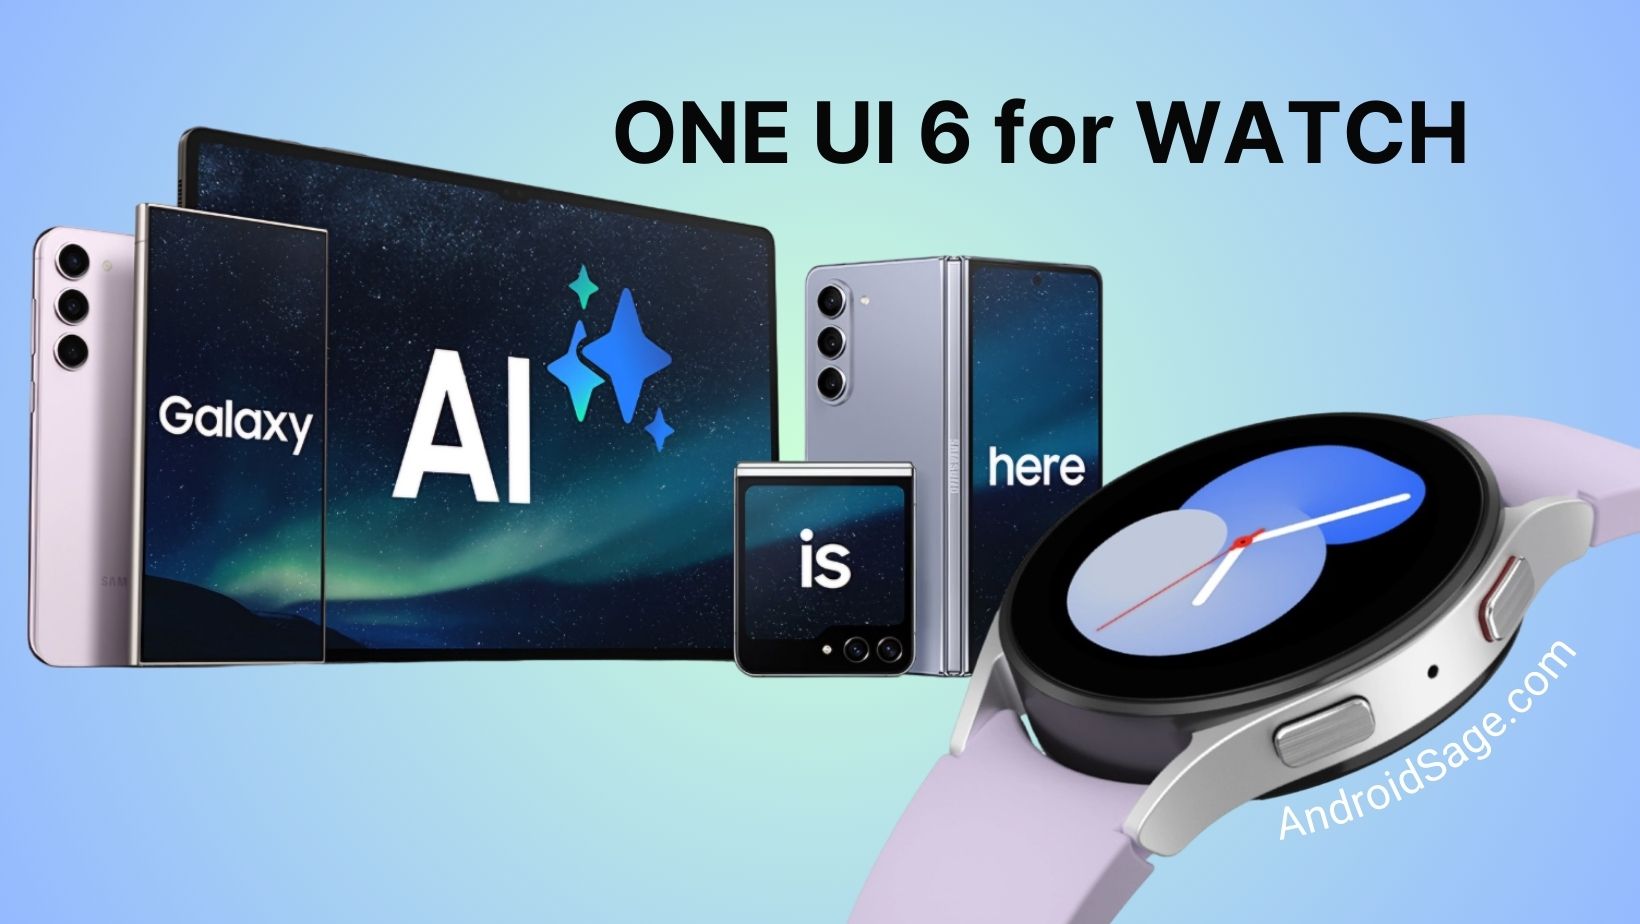 Samsung Expands One UI 6 Watch Beta Program to Galaxy Watch 4, 5, and 6BT Models